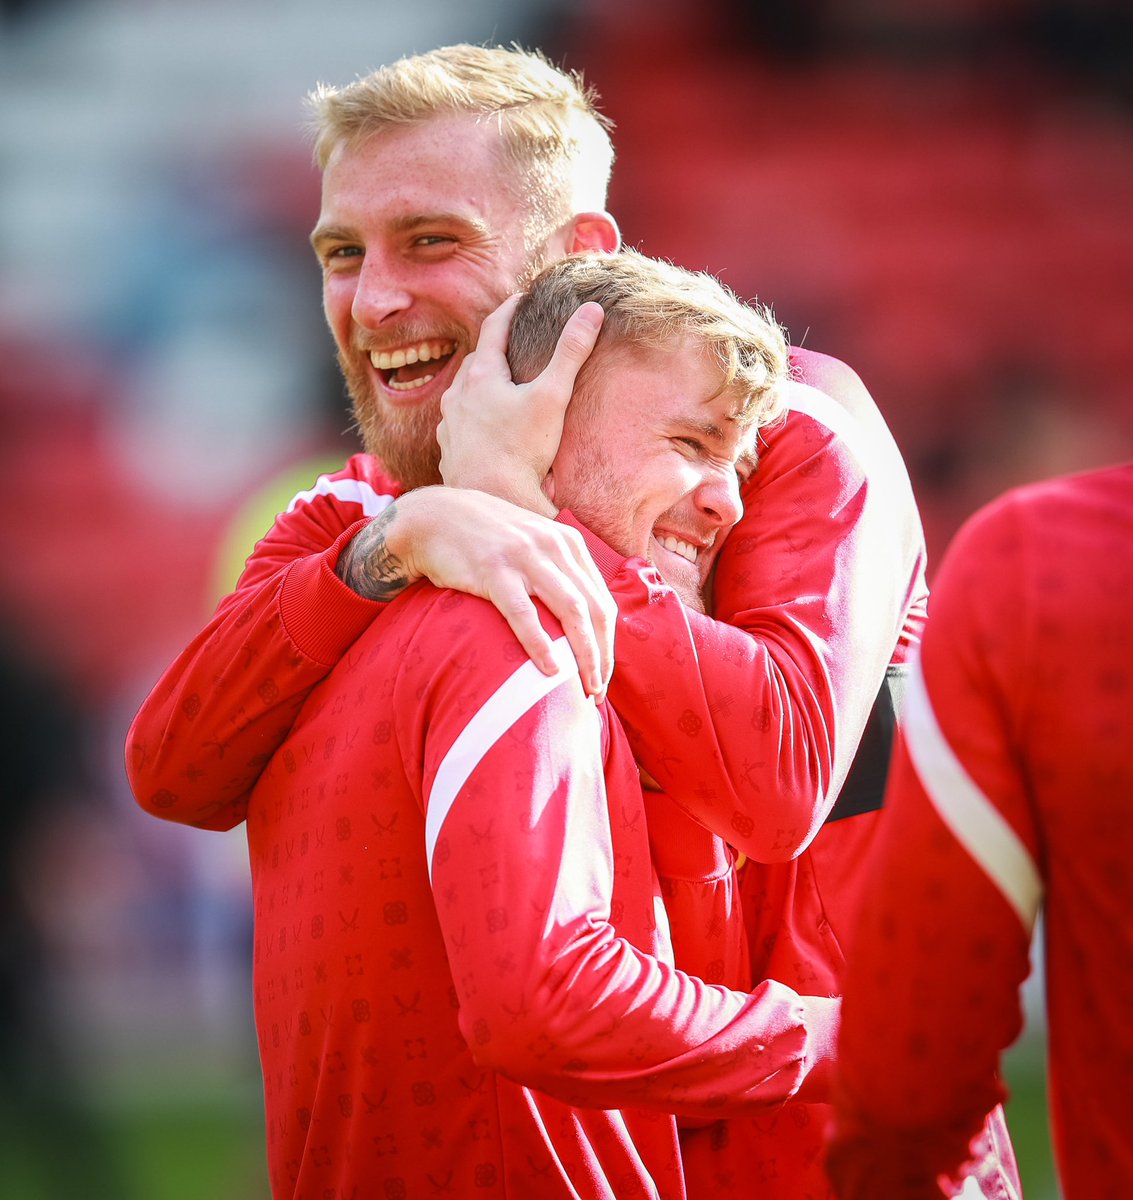 PH on @oli_mcburnie. ❤️ “That previously, wasn’t him. It’s not the goals that have led to a shift, it’s him. His approach. He’s done it himself, made a lot of changes. He’s got the bit between his teeth. He’s in a good place, but I still think there’s more.”